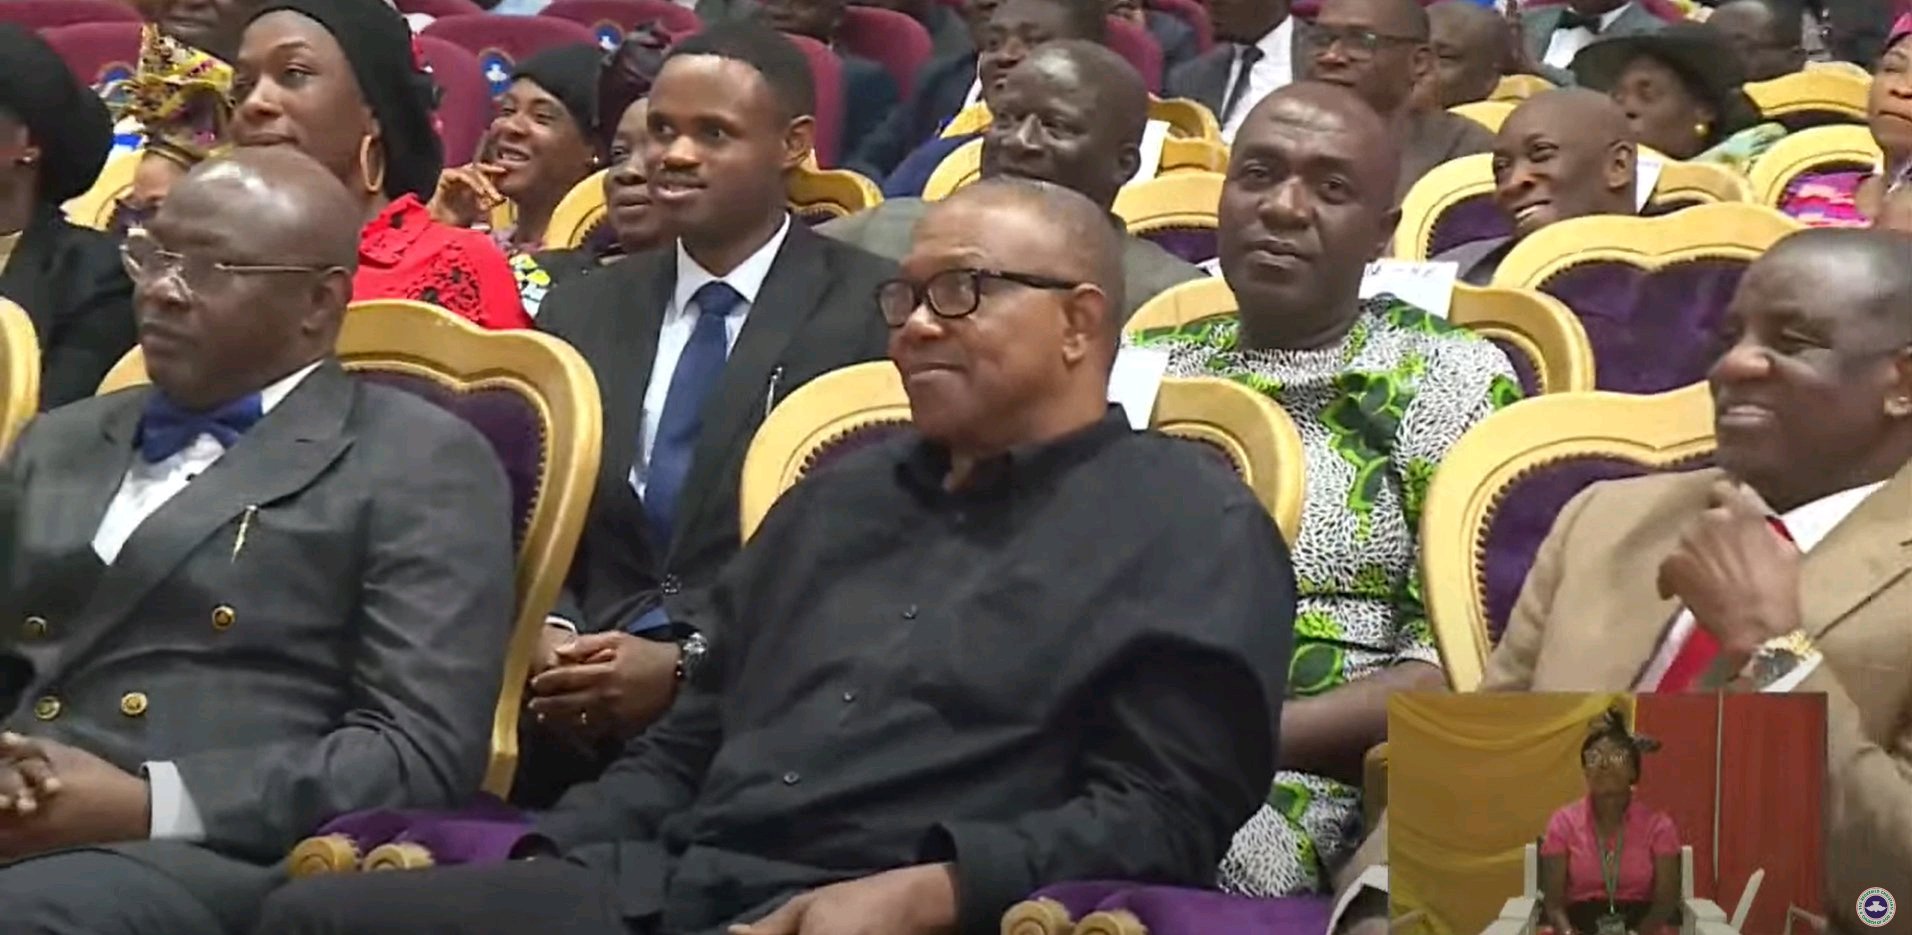 Mr Peter Obi Reacts After Worshipping At RCCG Camp For the first time